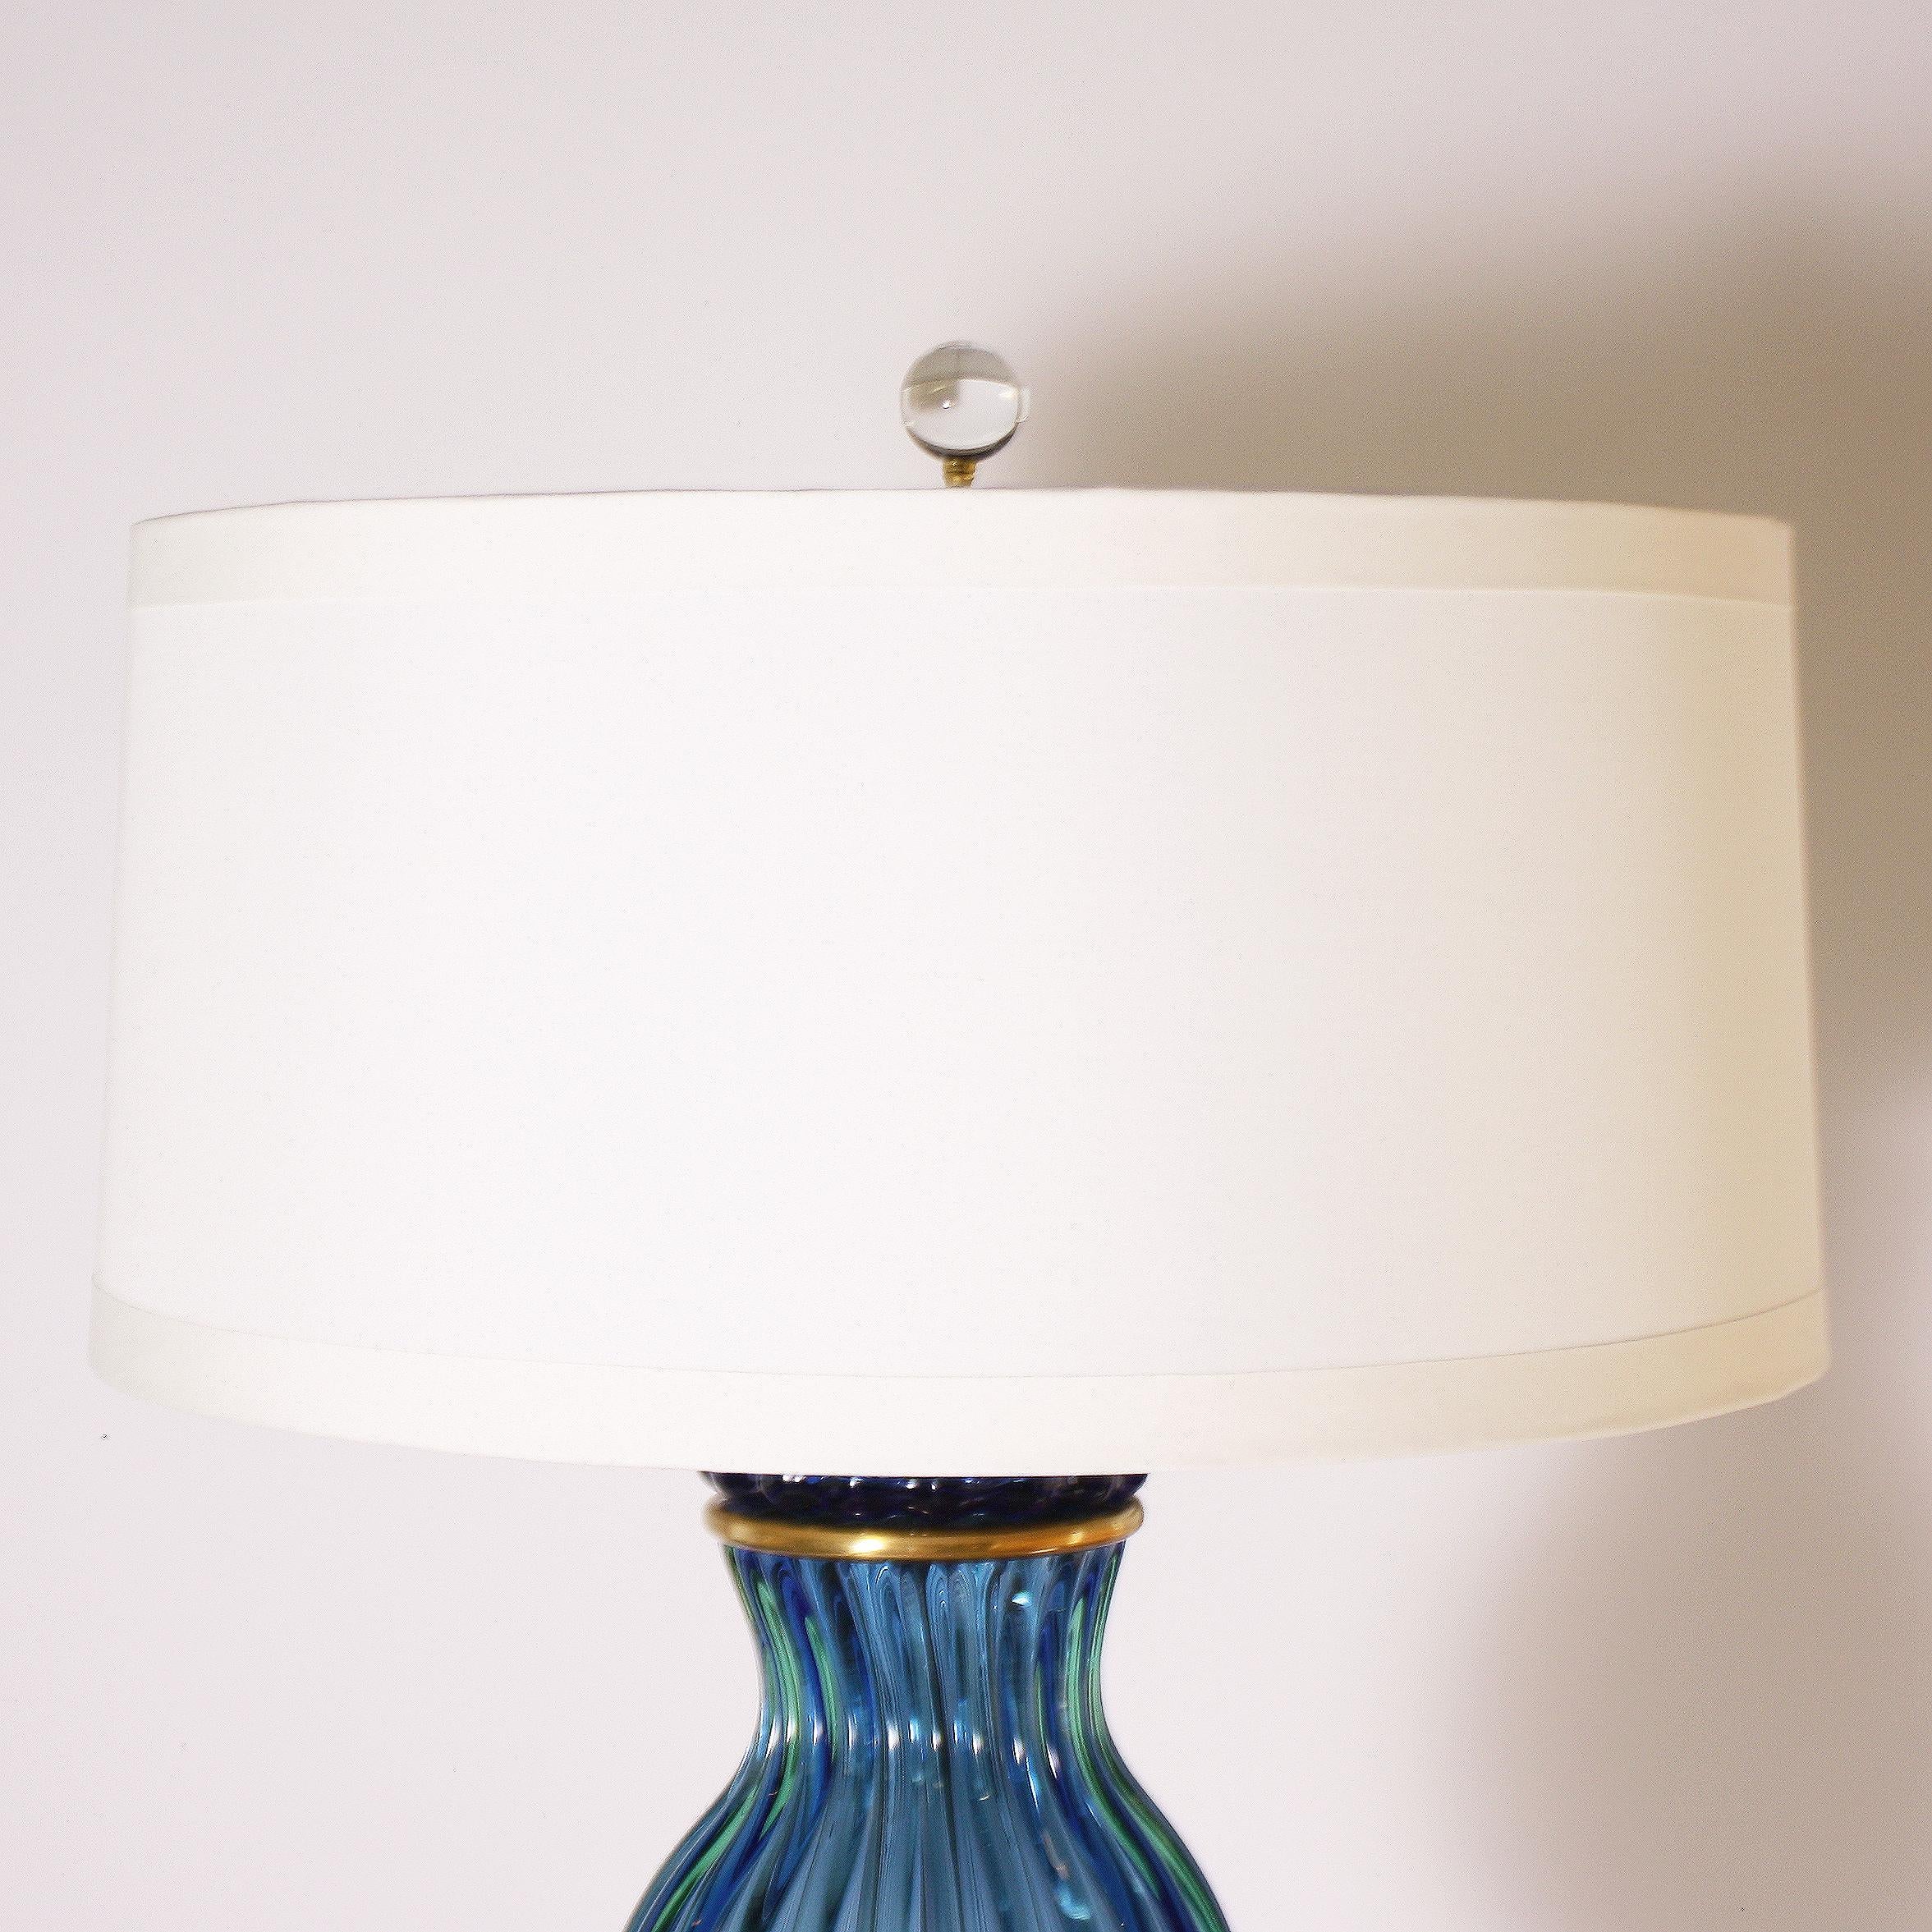 Pair of Marbro Murano glass lamps with brass detailing, circa 1950
$10,900.